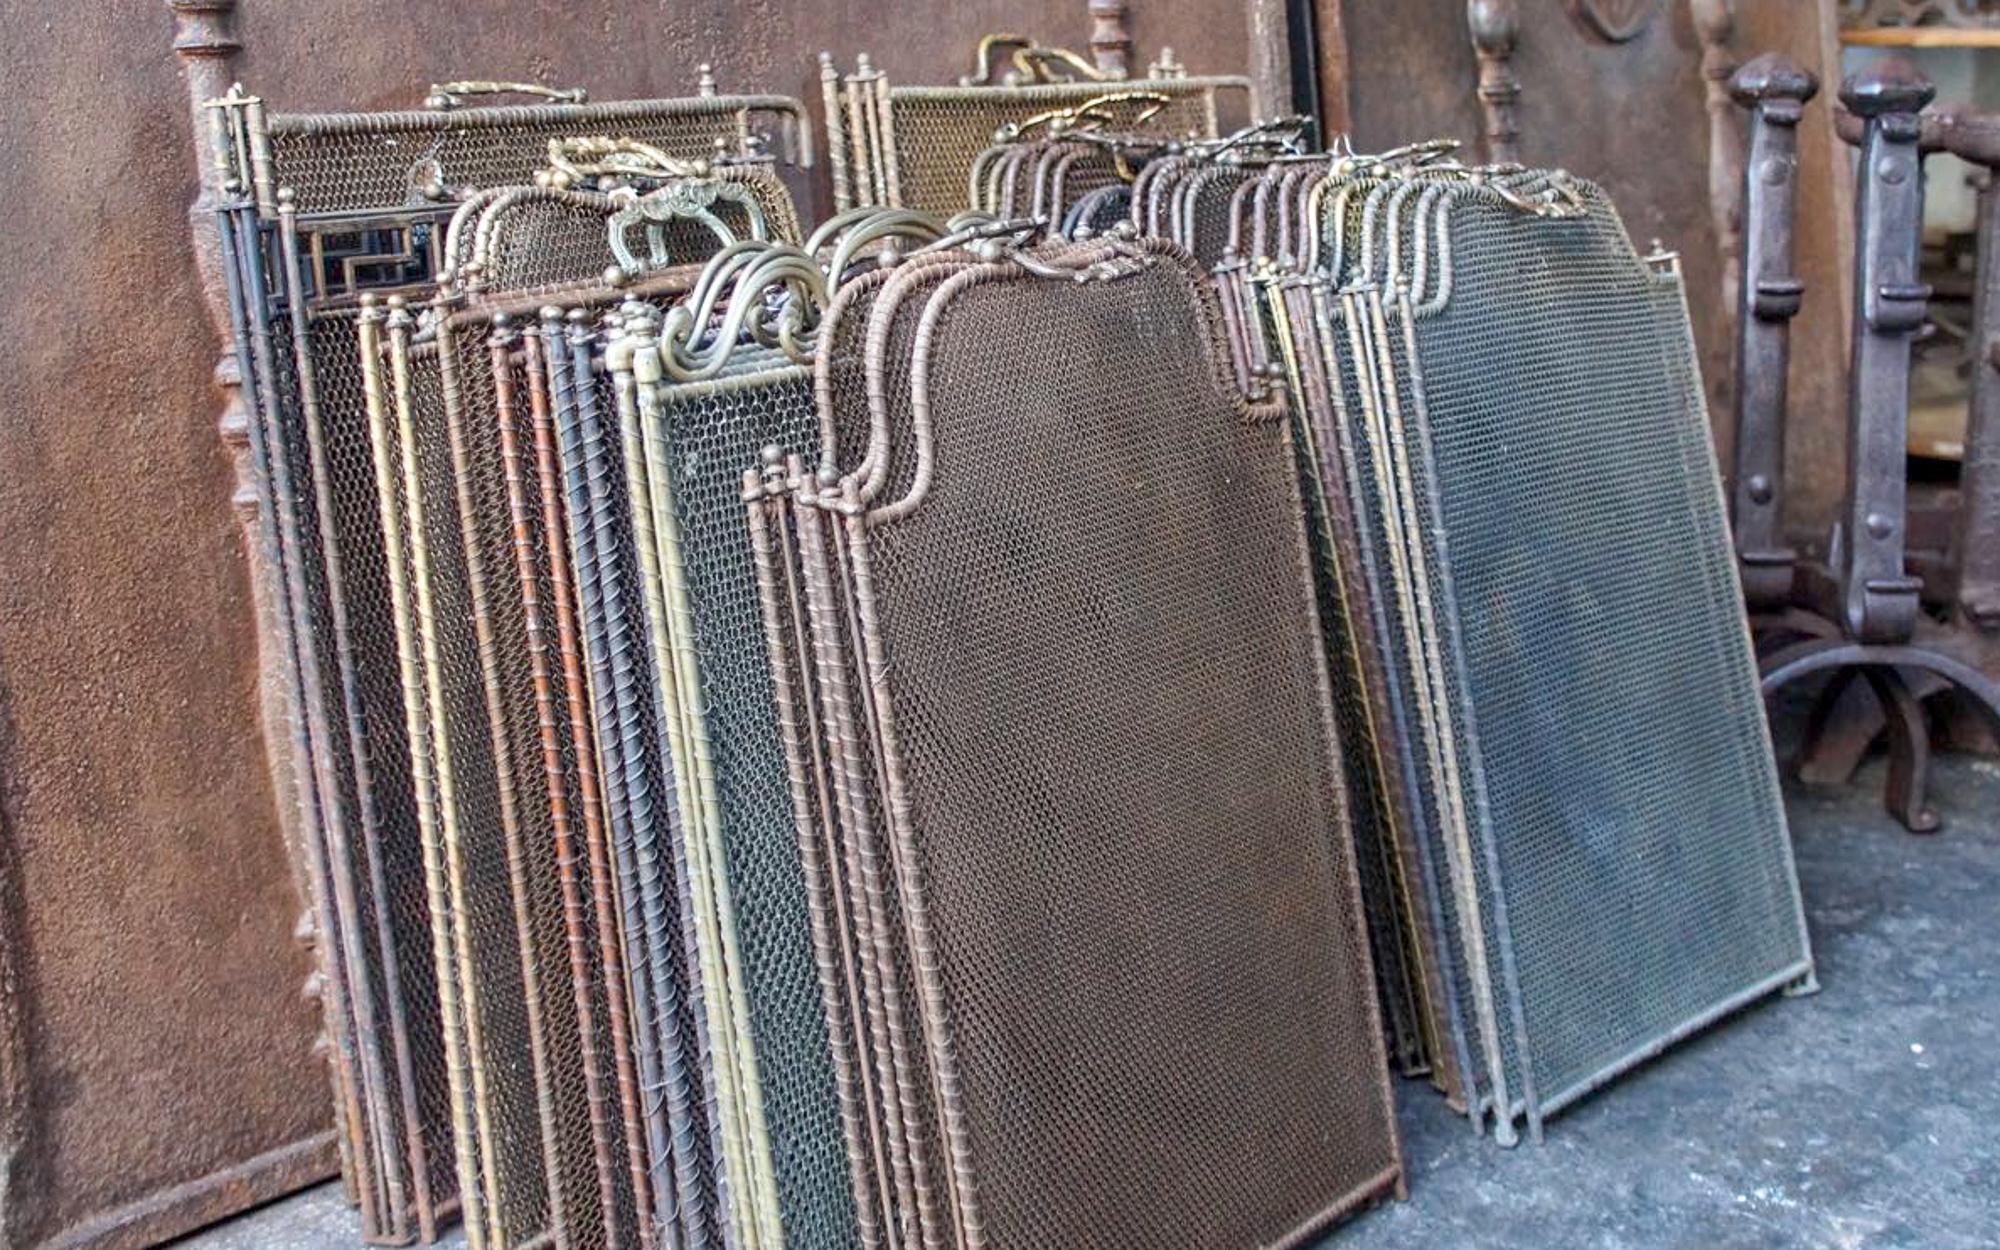 These fire screens can also be bought separately. Prices vary somewhat. The indicated price is the average including shipping to North-America and Europe.

We have a unique and specialized collection of antique and used fireplace accessories